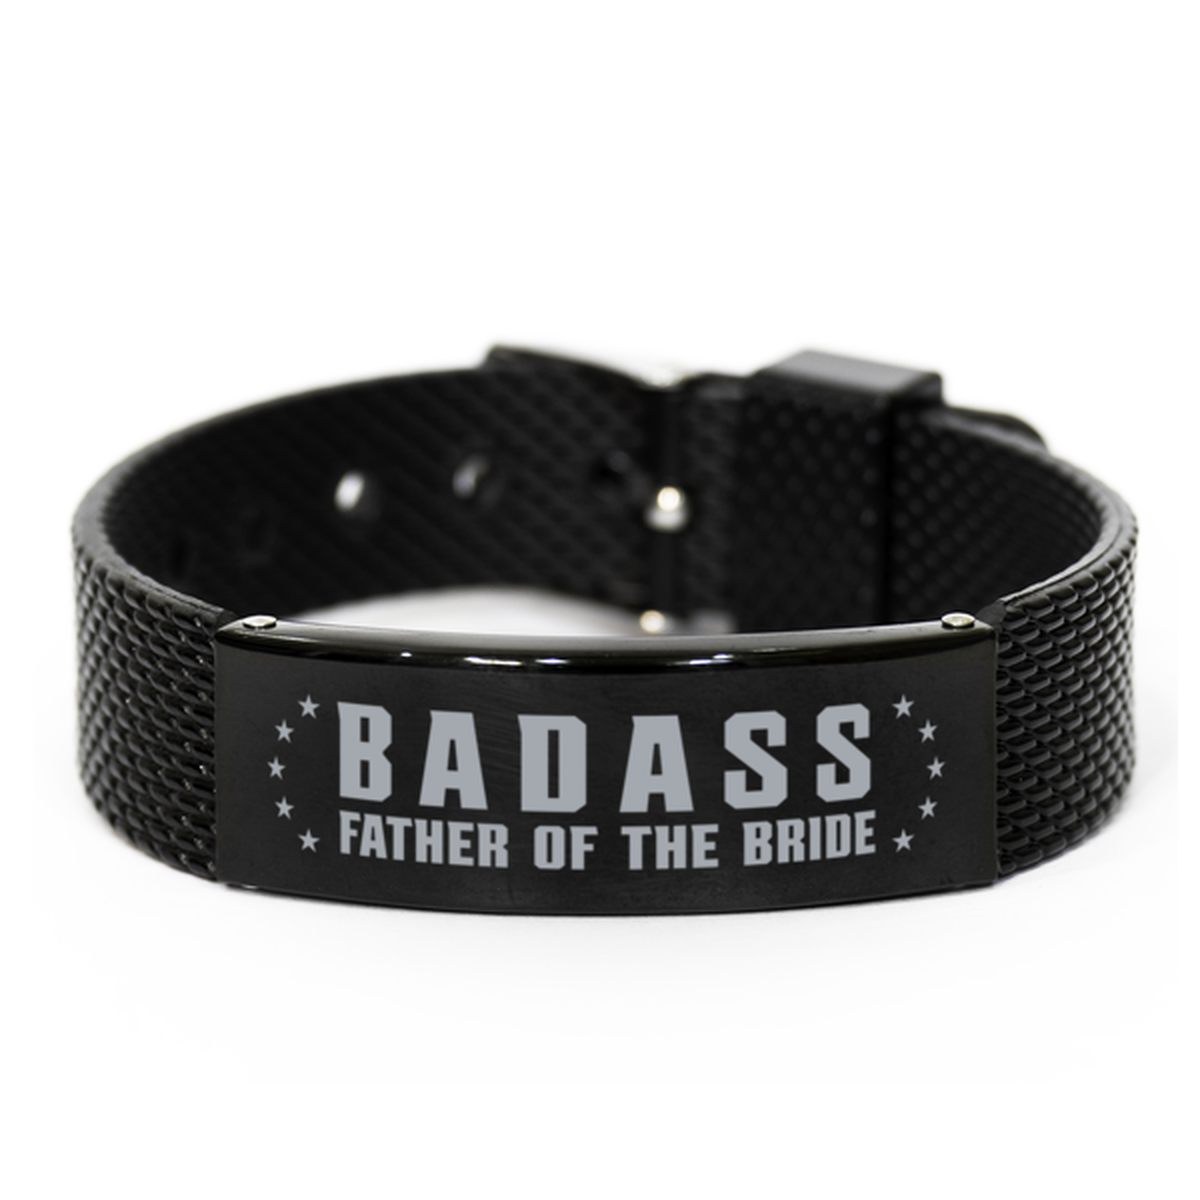 Father of the bride Black Shark Mesh Bracelet, Badass Father of the Bride, Funny Family Gifts For Father of the bride From Son Daughter